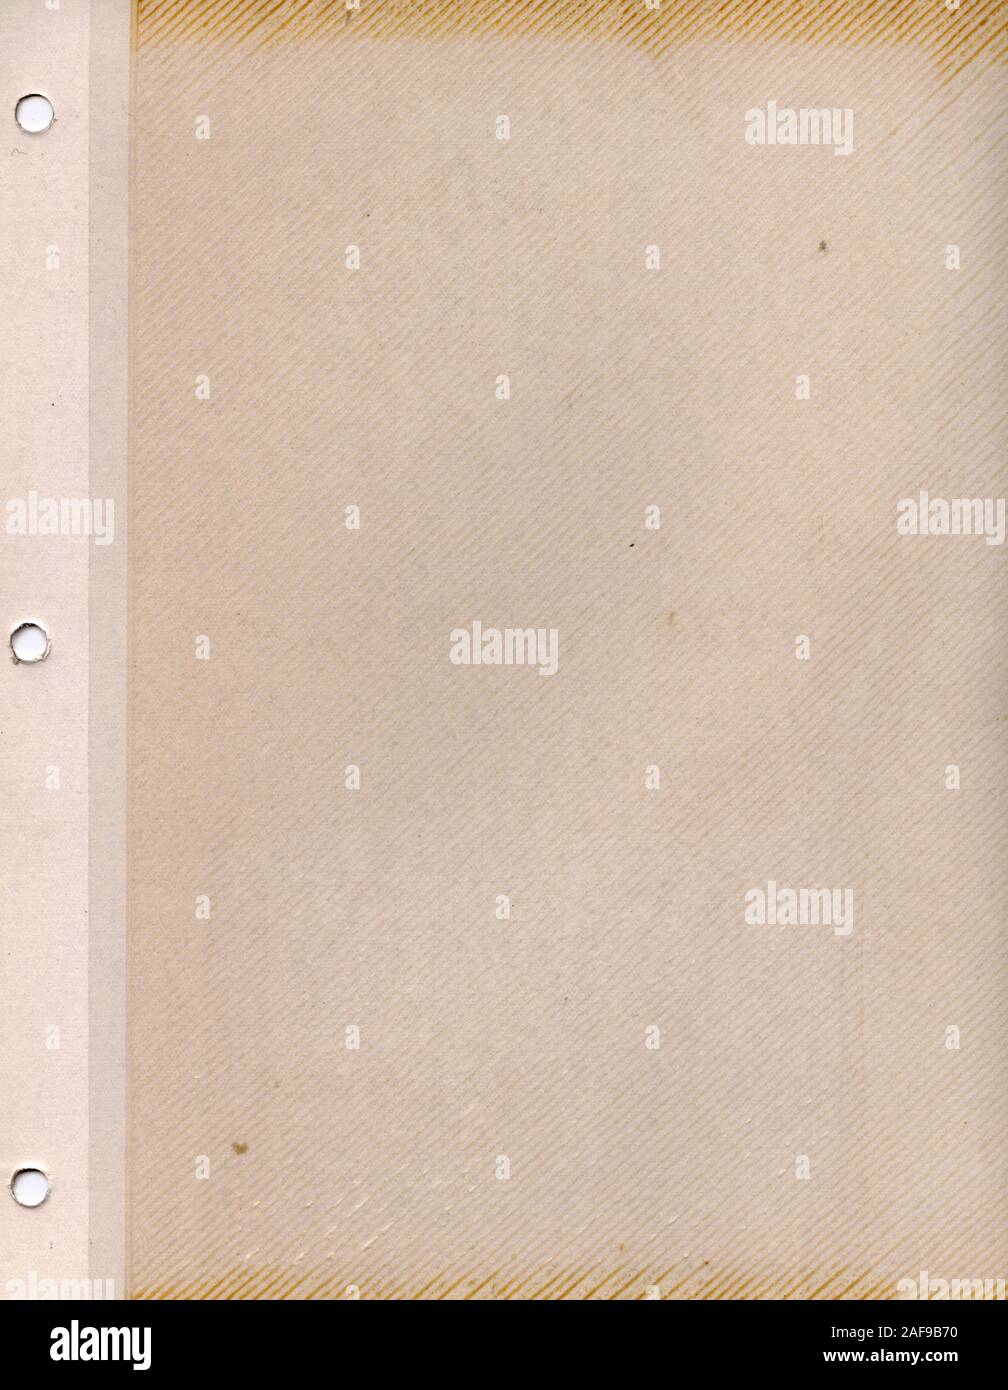 Old blank page from a photograph album from the 1970s. The plastic cover is  stuck on the sticky paper underneath. High resolution scan Stock Photo -  Alamy